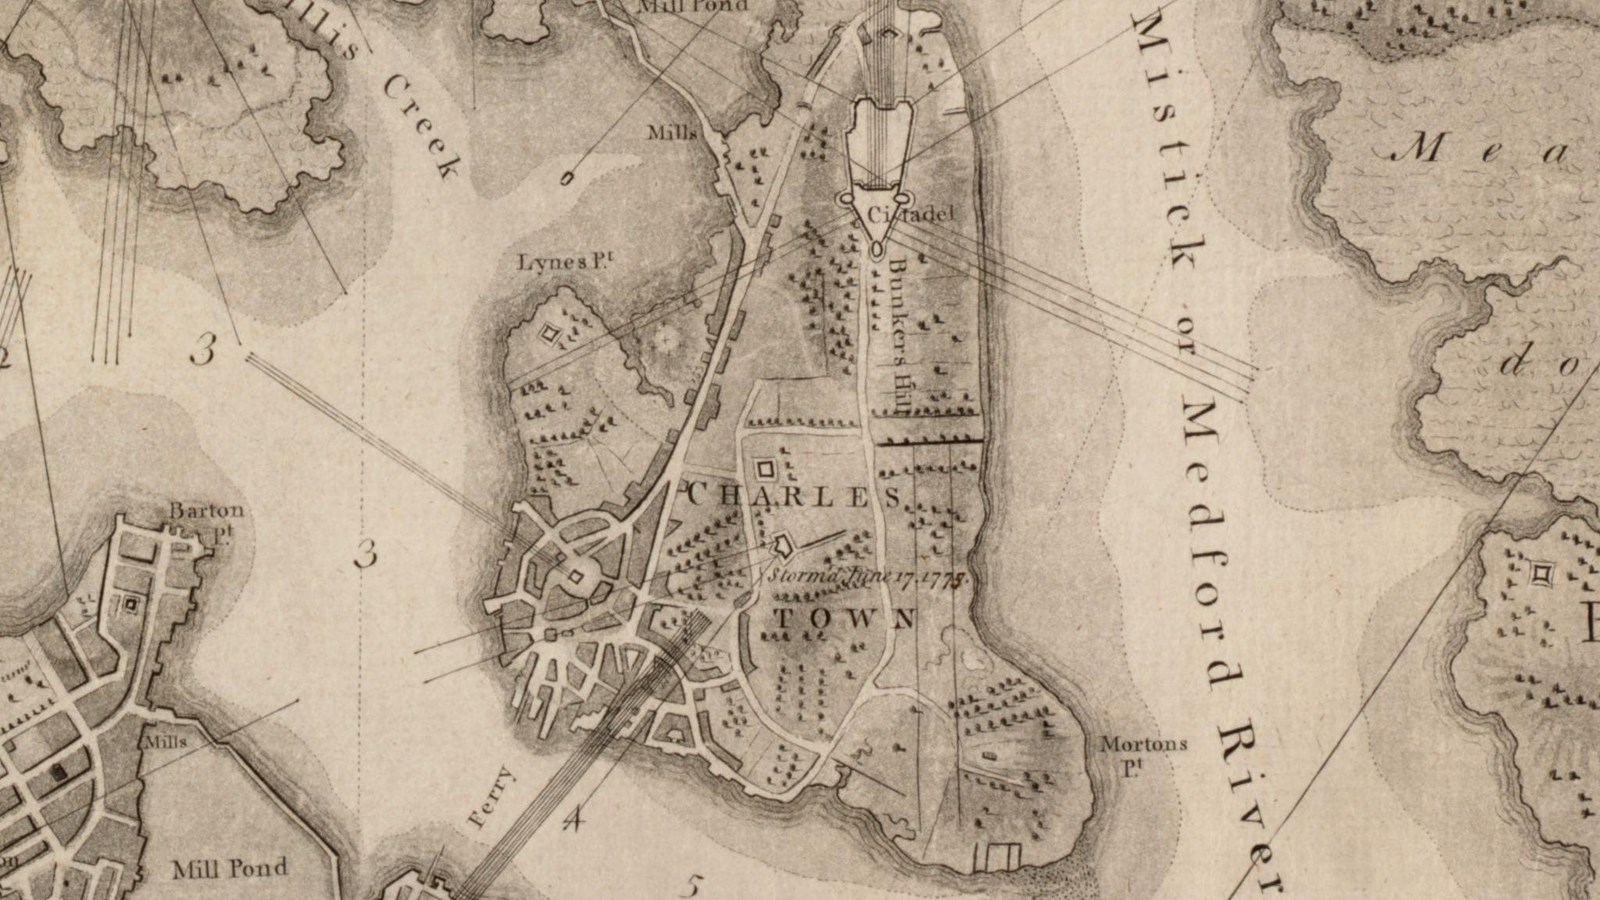 Historical map featuring military works in Charlestown.